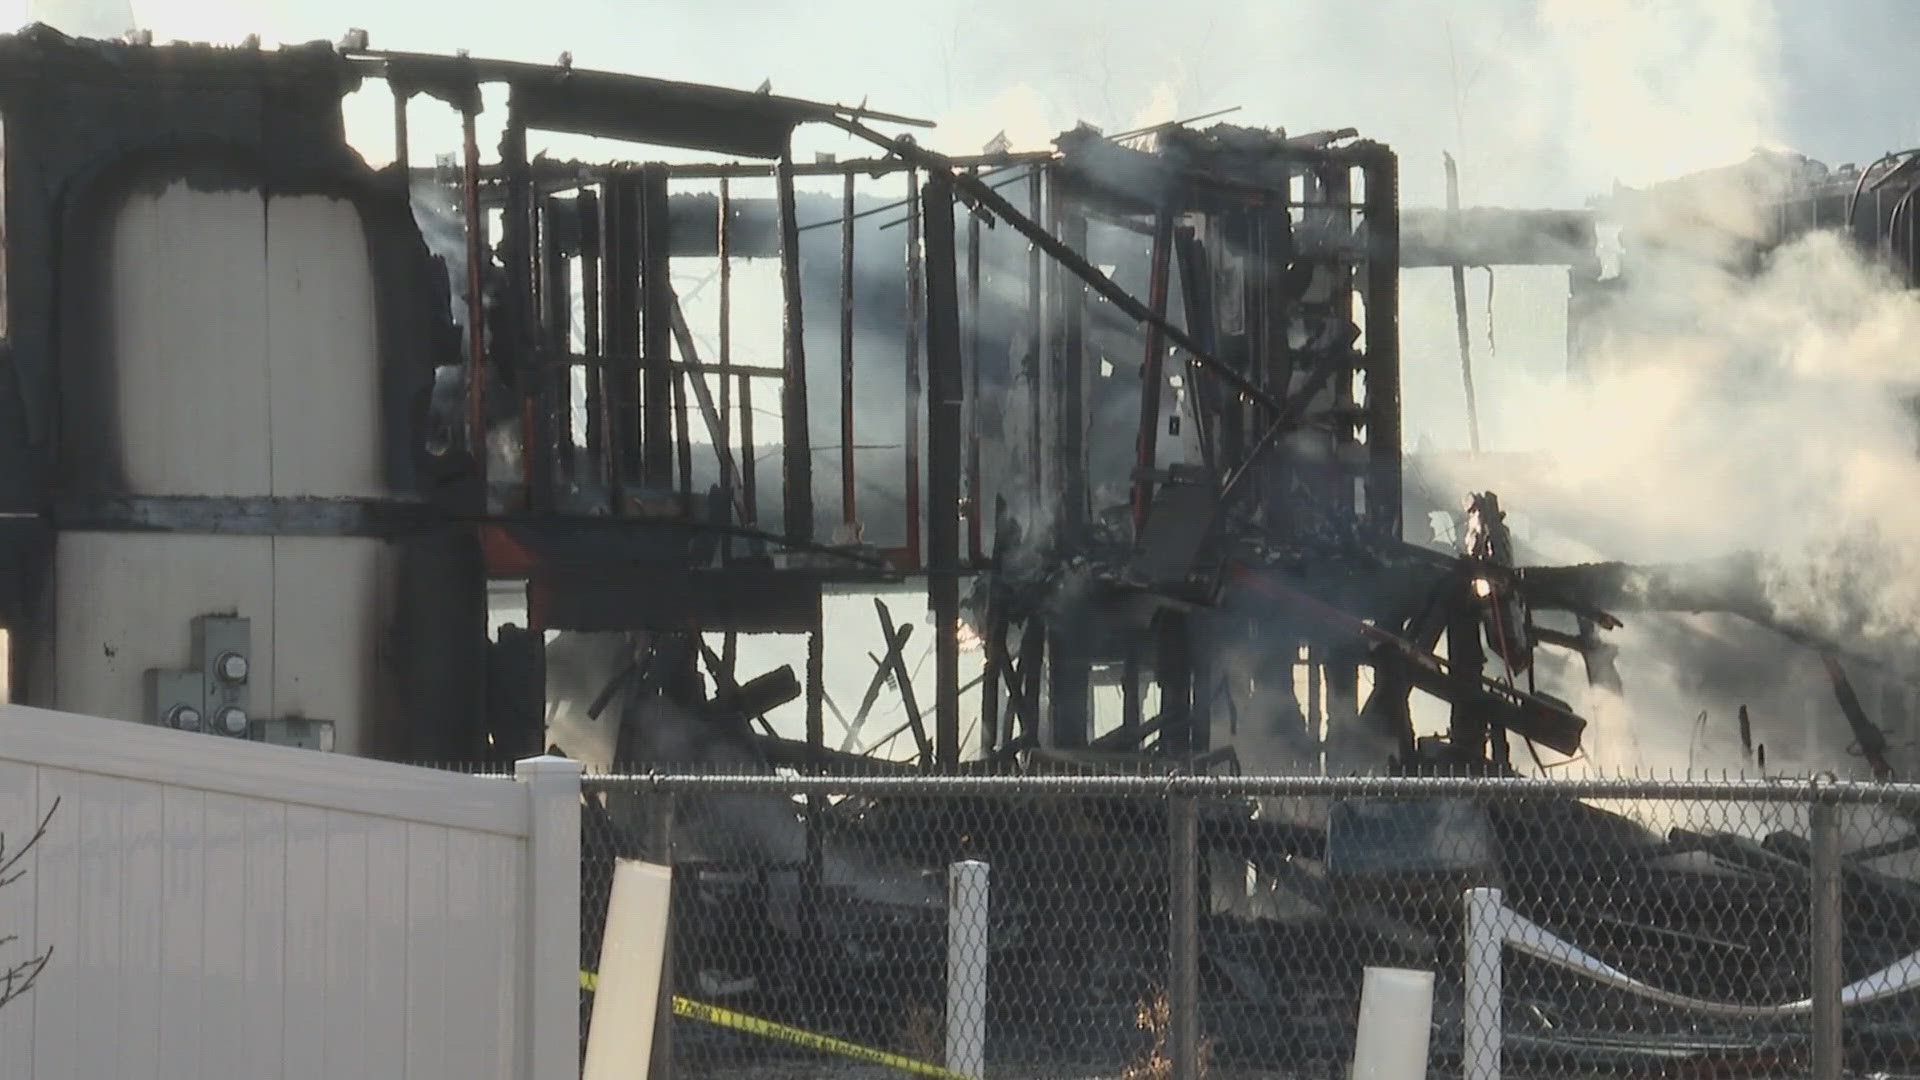 In Palisade, Colorado, an apartment complex in the 900 block of Iowa Avenue is a "complete and total loss" after it caught fire following an explosion.